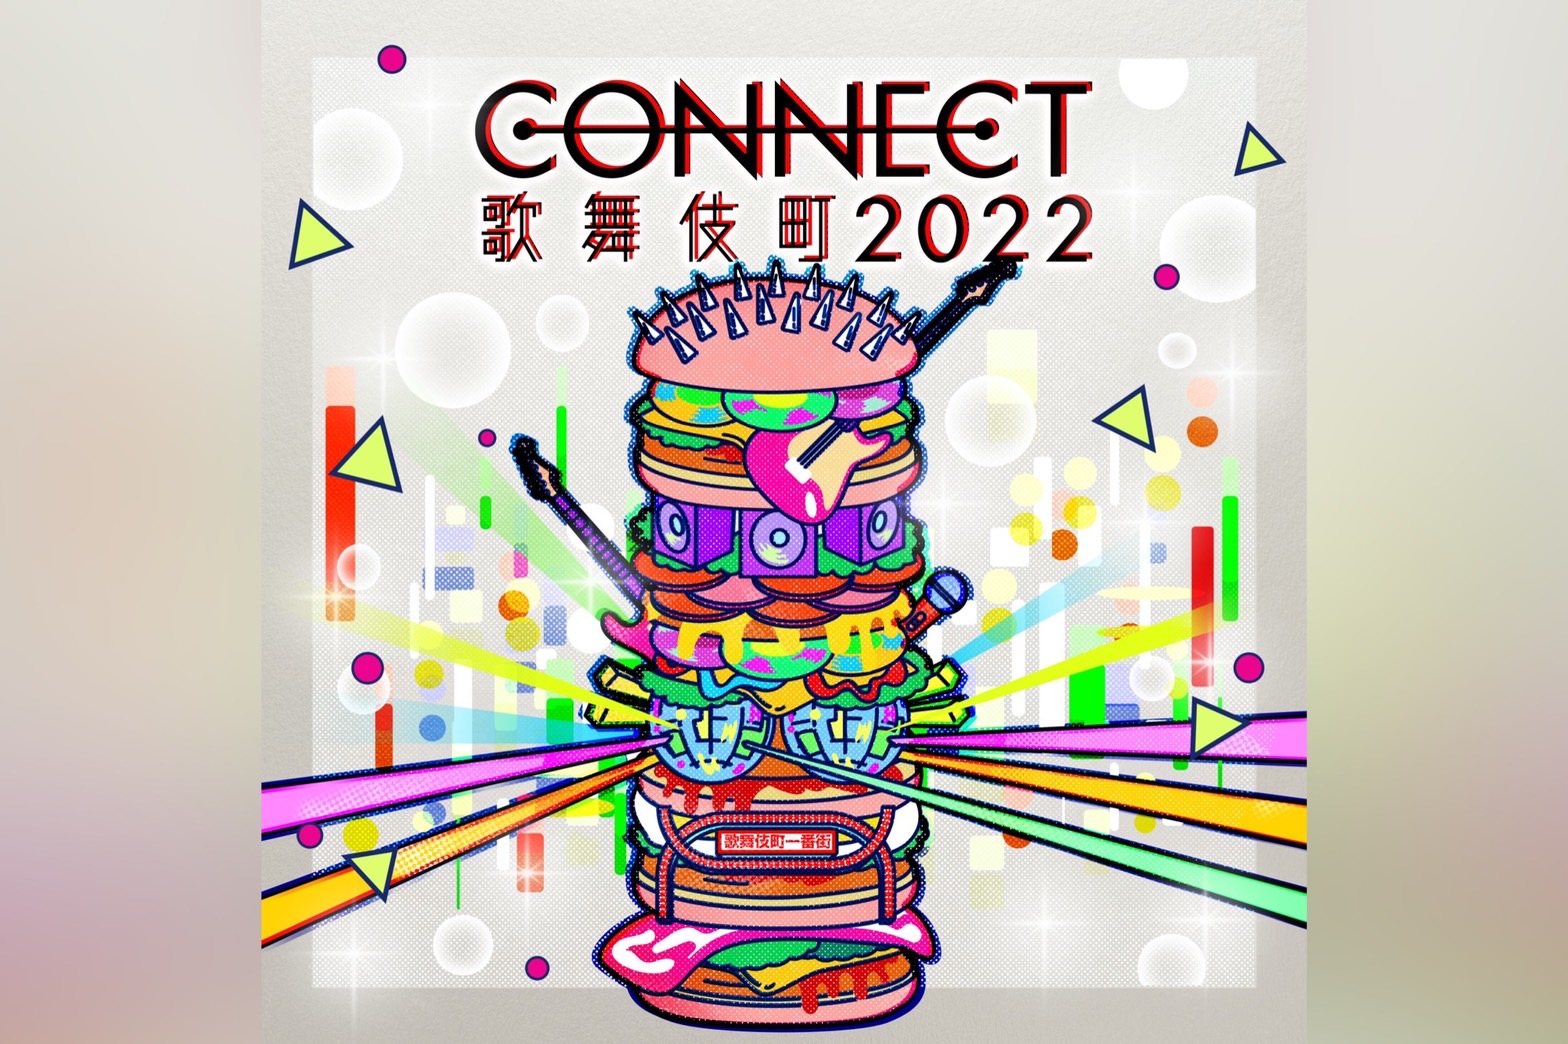 CONNECT歌舞伎町2022 出演決定！